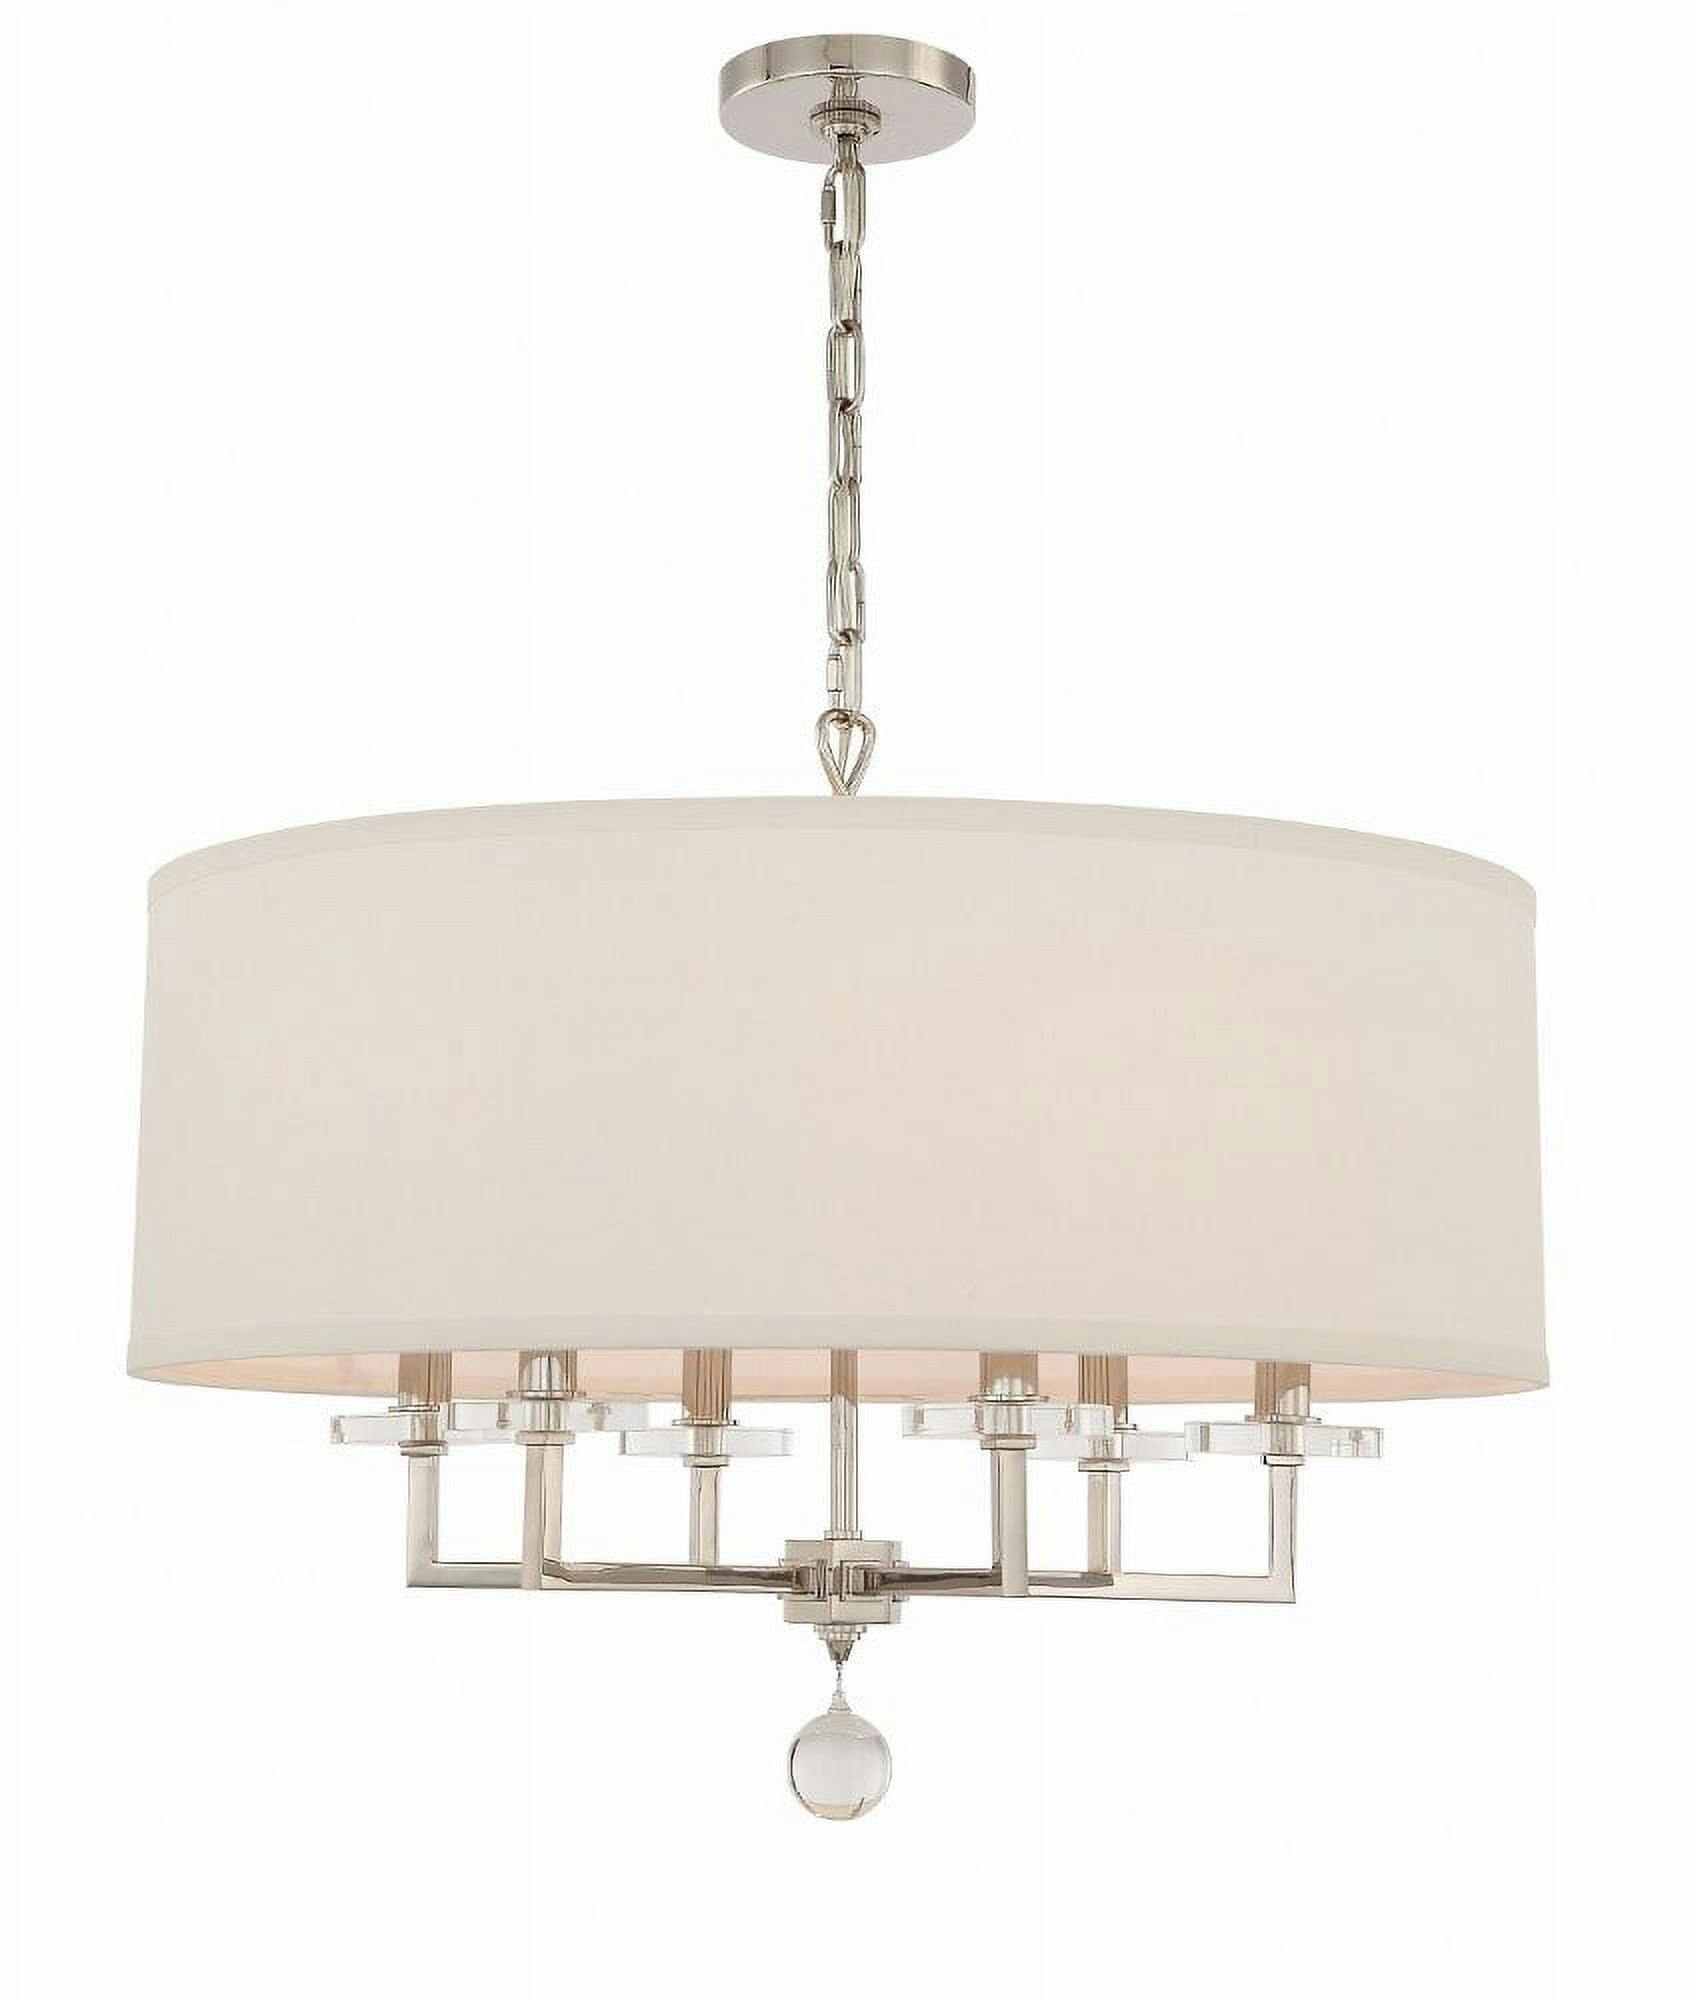 Elegant Paxton Polished Nickel 6-Light Chandelier with Silk Drum Shade and Crystal Accents